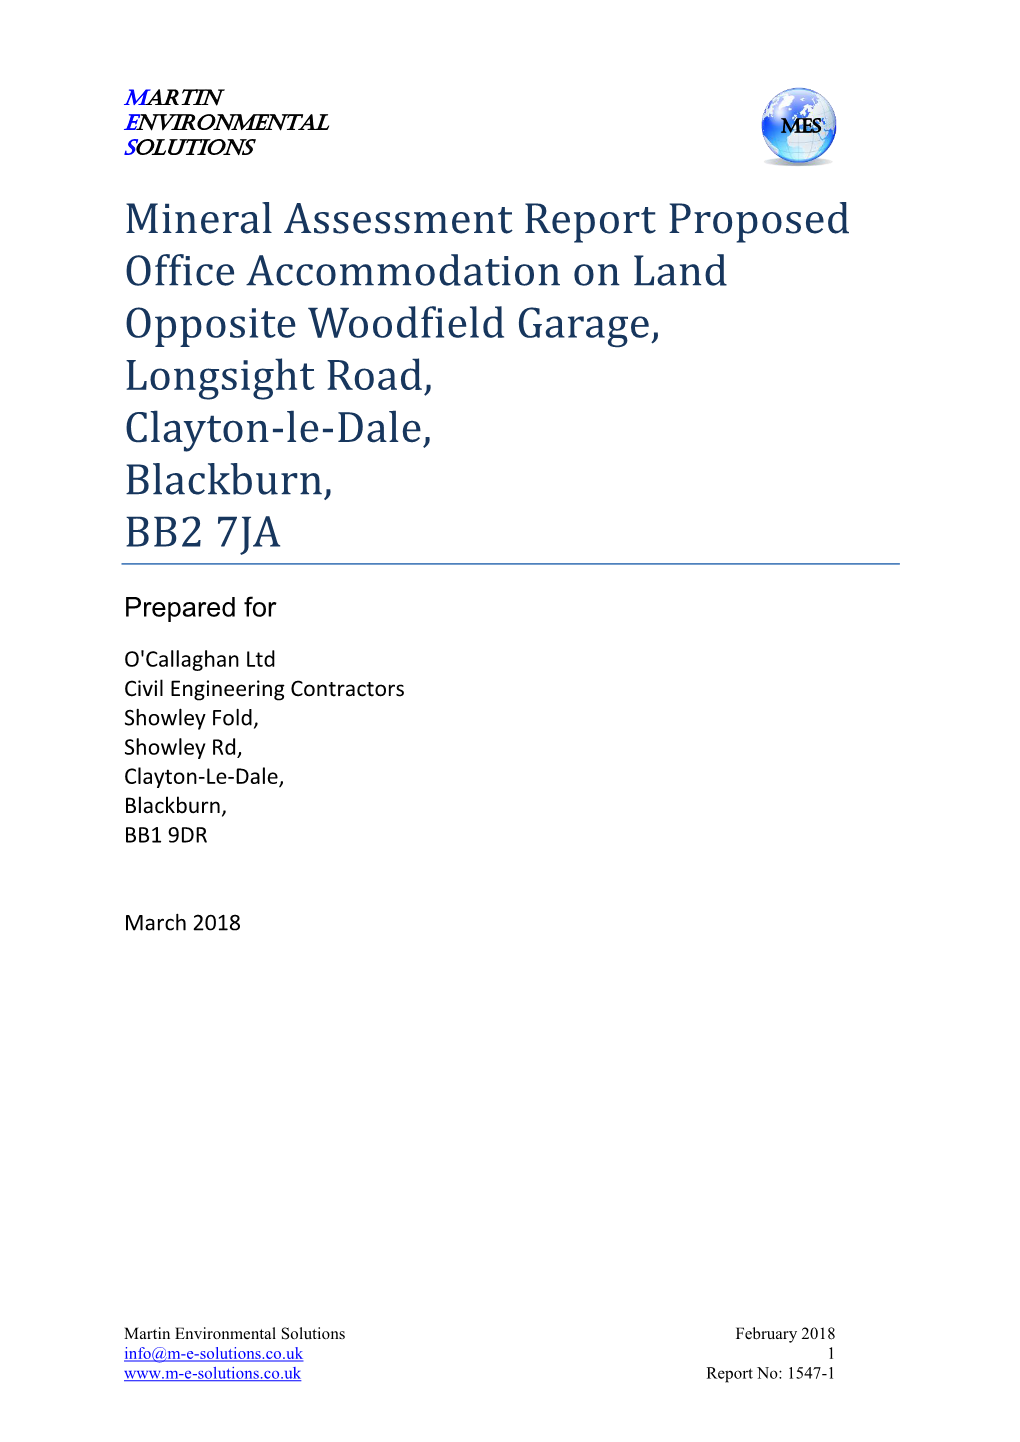 Mineral Assessment Report Proposed Office Accommodation on Land Opposite Woodfield Garage, Longsight Road, Clayton-Le-Dale, Blackburn, BB2 7JA